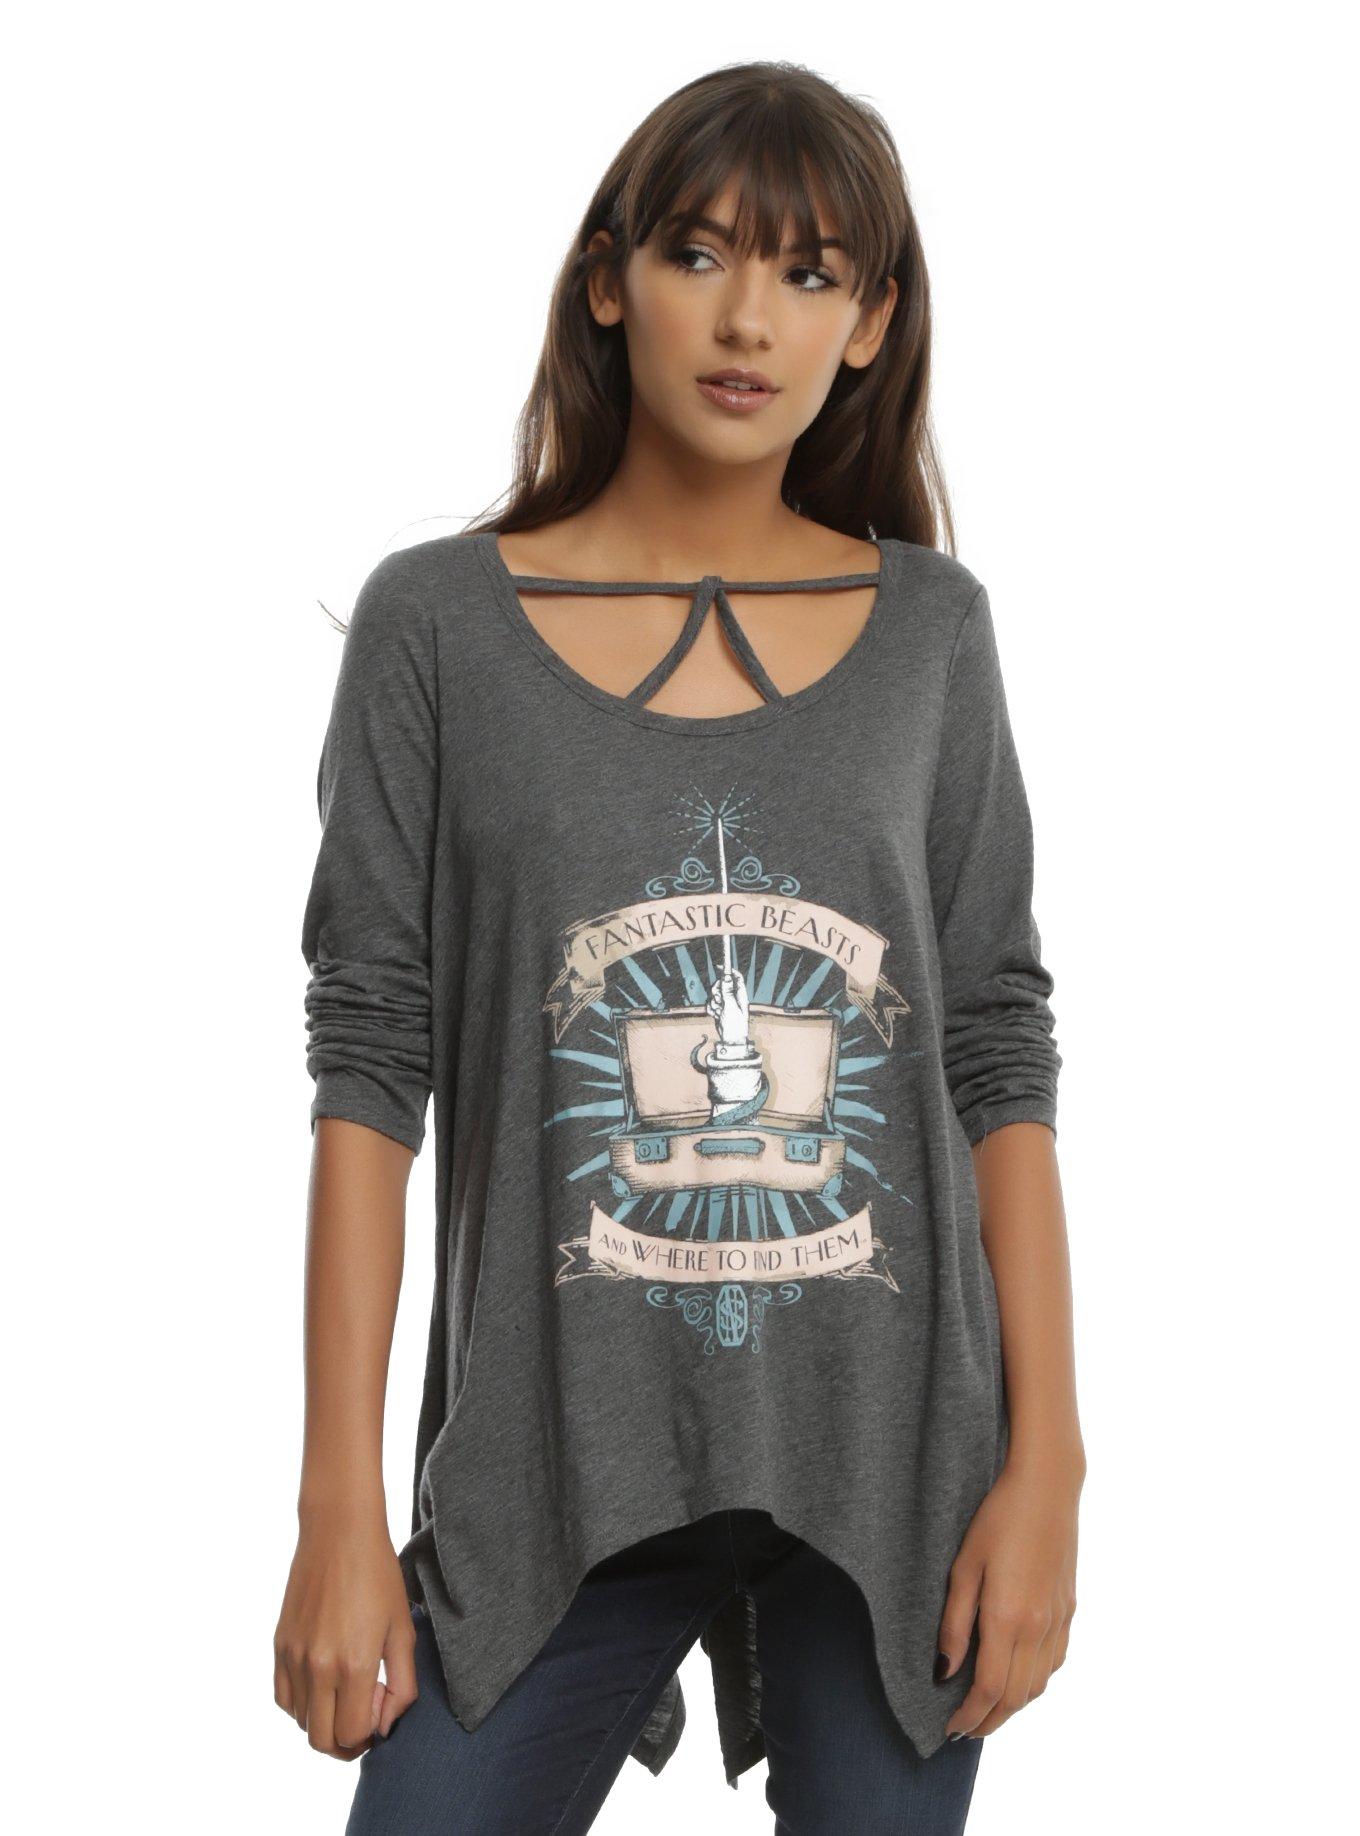 Fantastic Beasts And Where To Find Them Strappy Long-Sleeve Top, GREY, hi-res